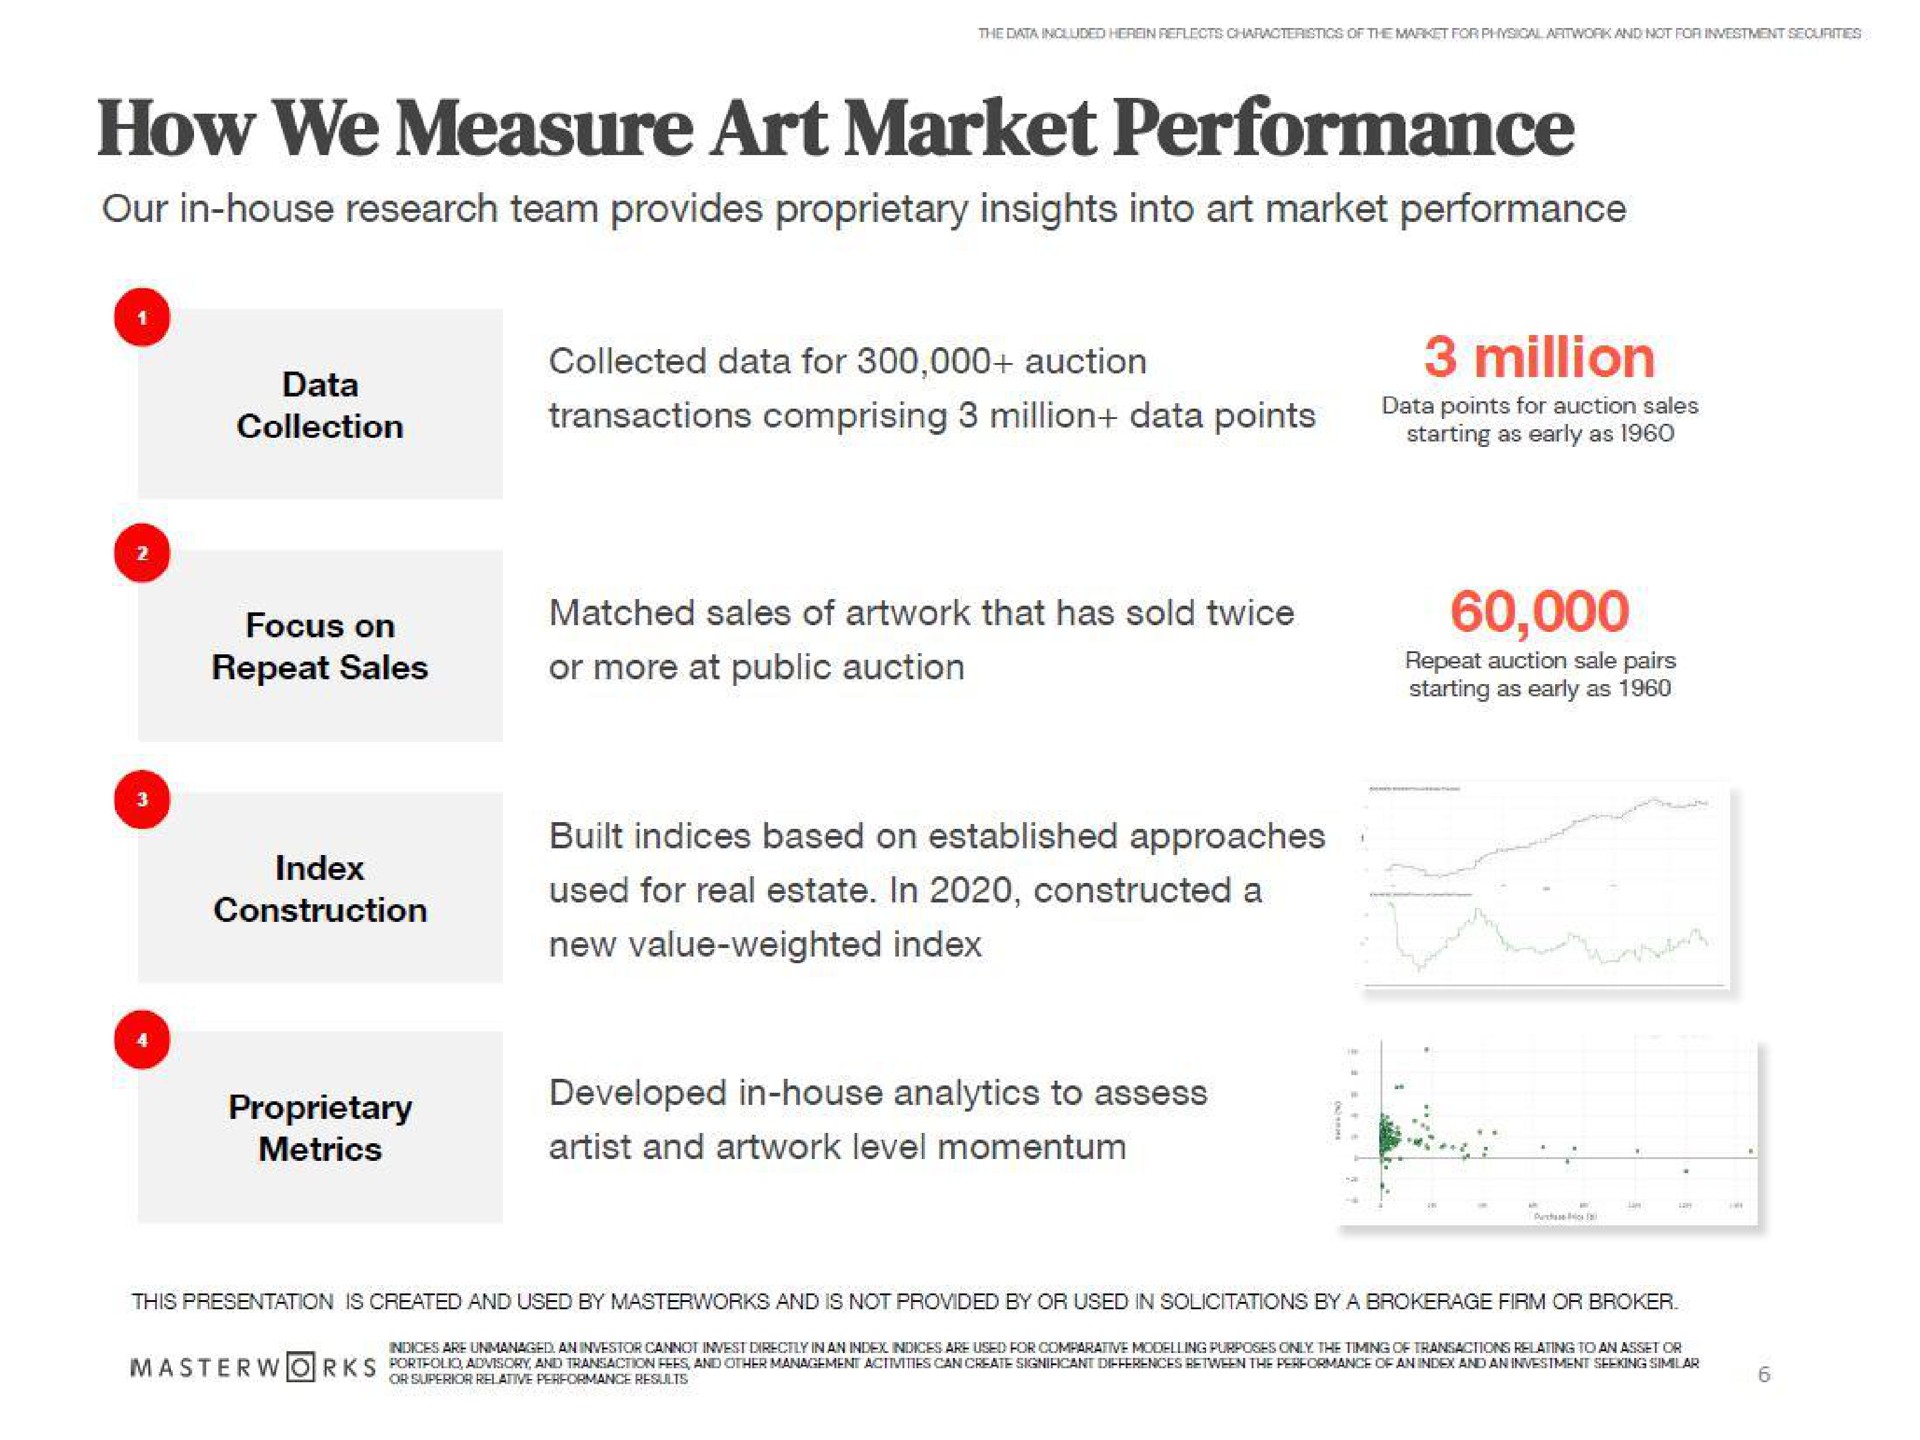 how we measure art market performance our in house research team provides proprietary insights into art market performance son collected data for auction transactions comprising million data points eas million metrics artist and level momentum be | Masterworks